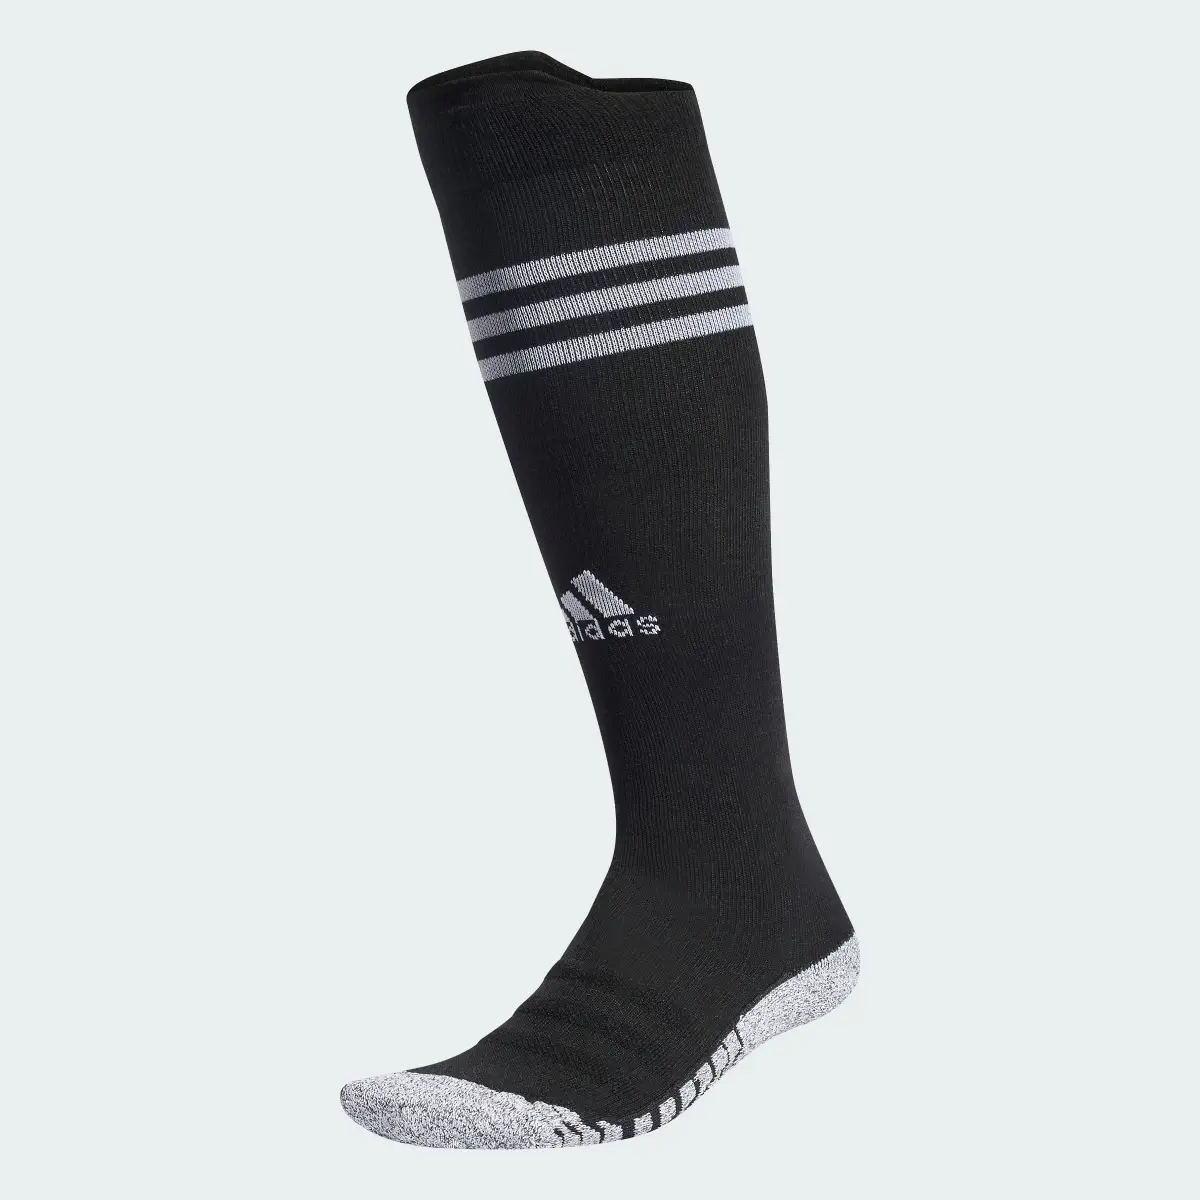 Adidas Chaussettes montantes All Blacks Rugby. 2